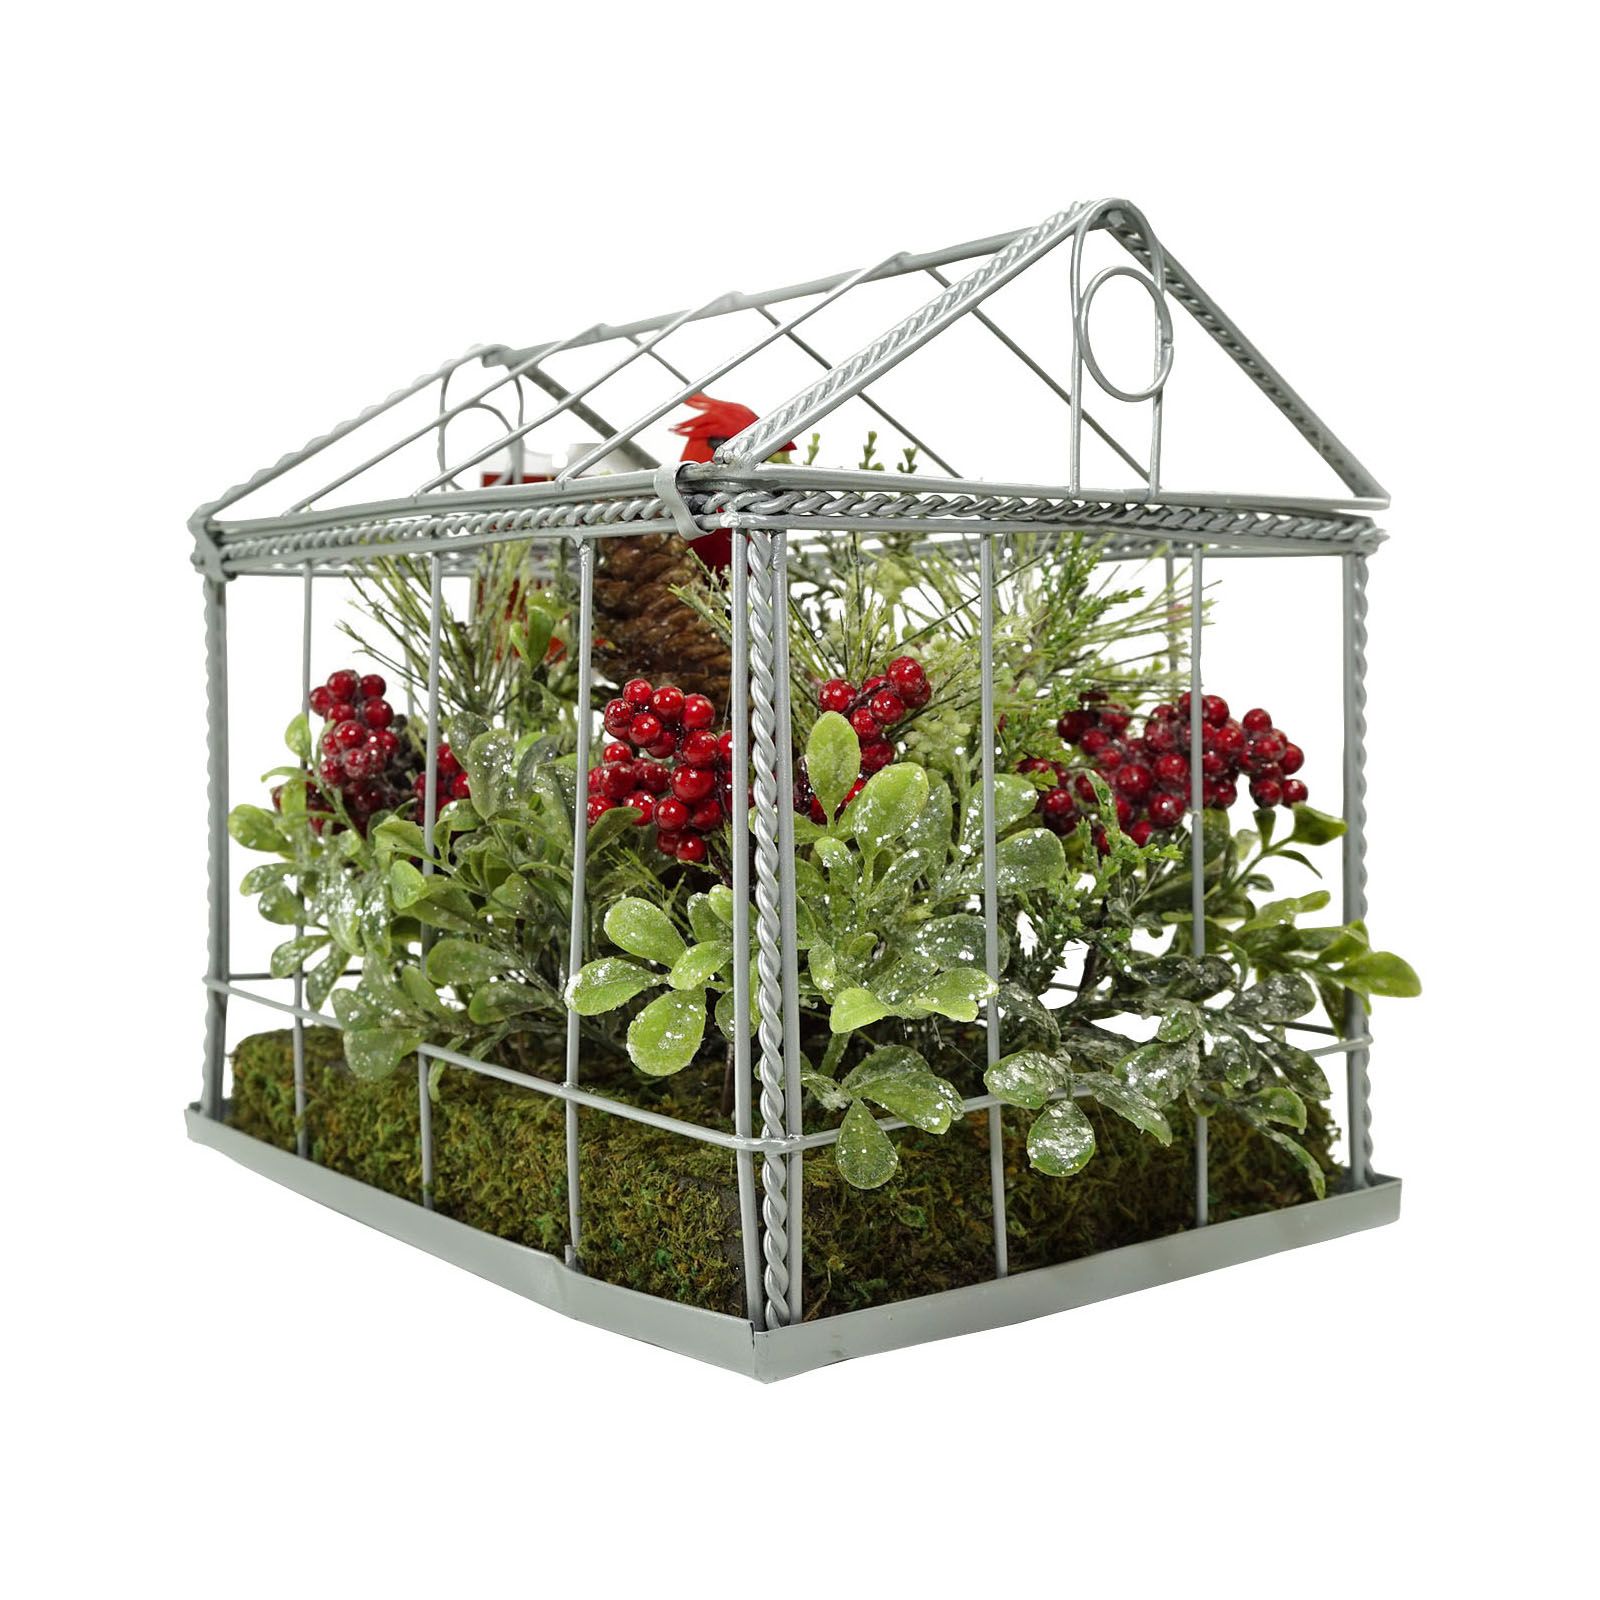 Northlight 9&quot; Cardinal Boxwood Artificial Christmas Greenhouse Arrangement - Red and Green